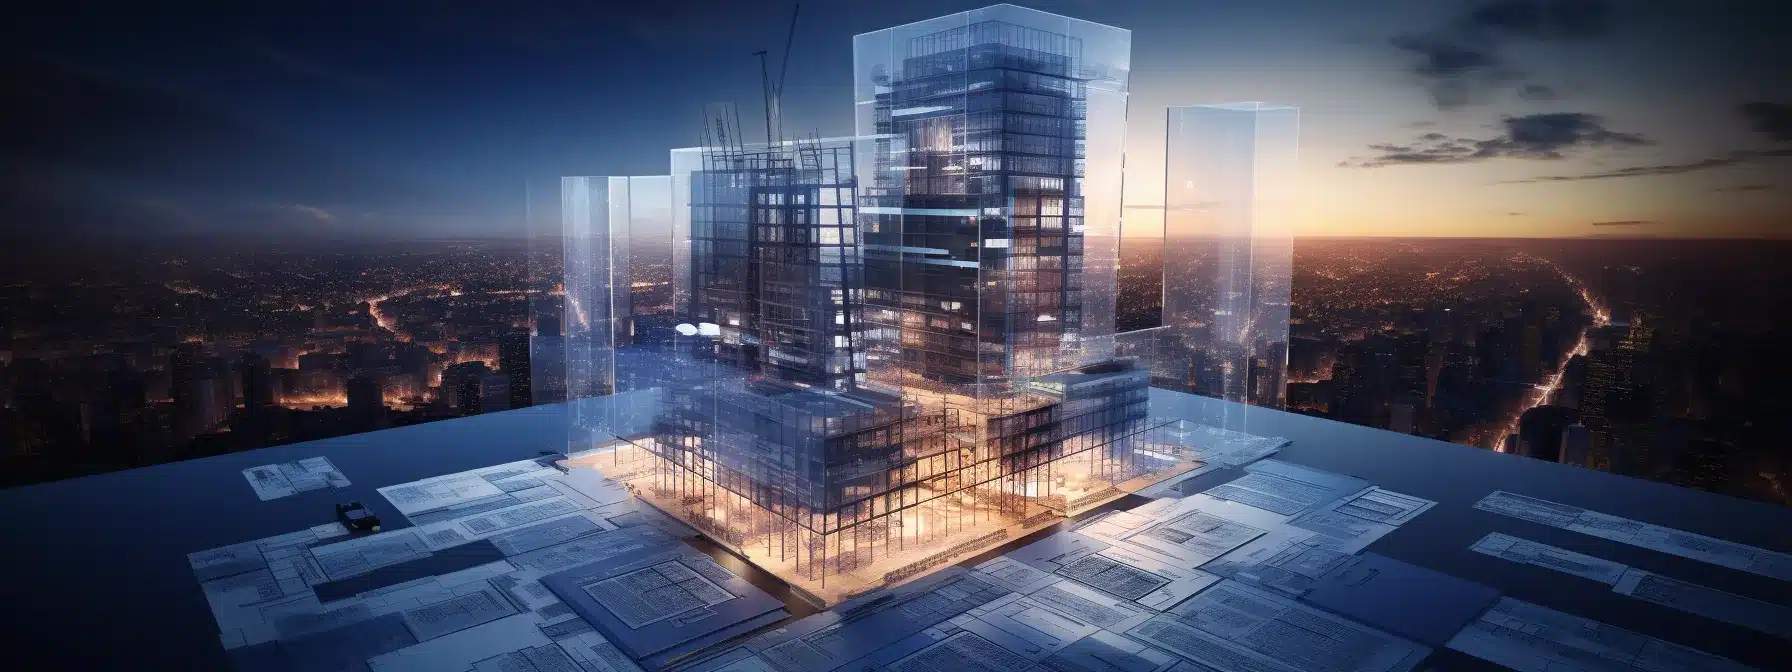 A Skyscraper Being Built With A Blueprint And Architecture As The Brand Strategy And A Positioning Statement Acting As The Cornerstone.